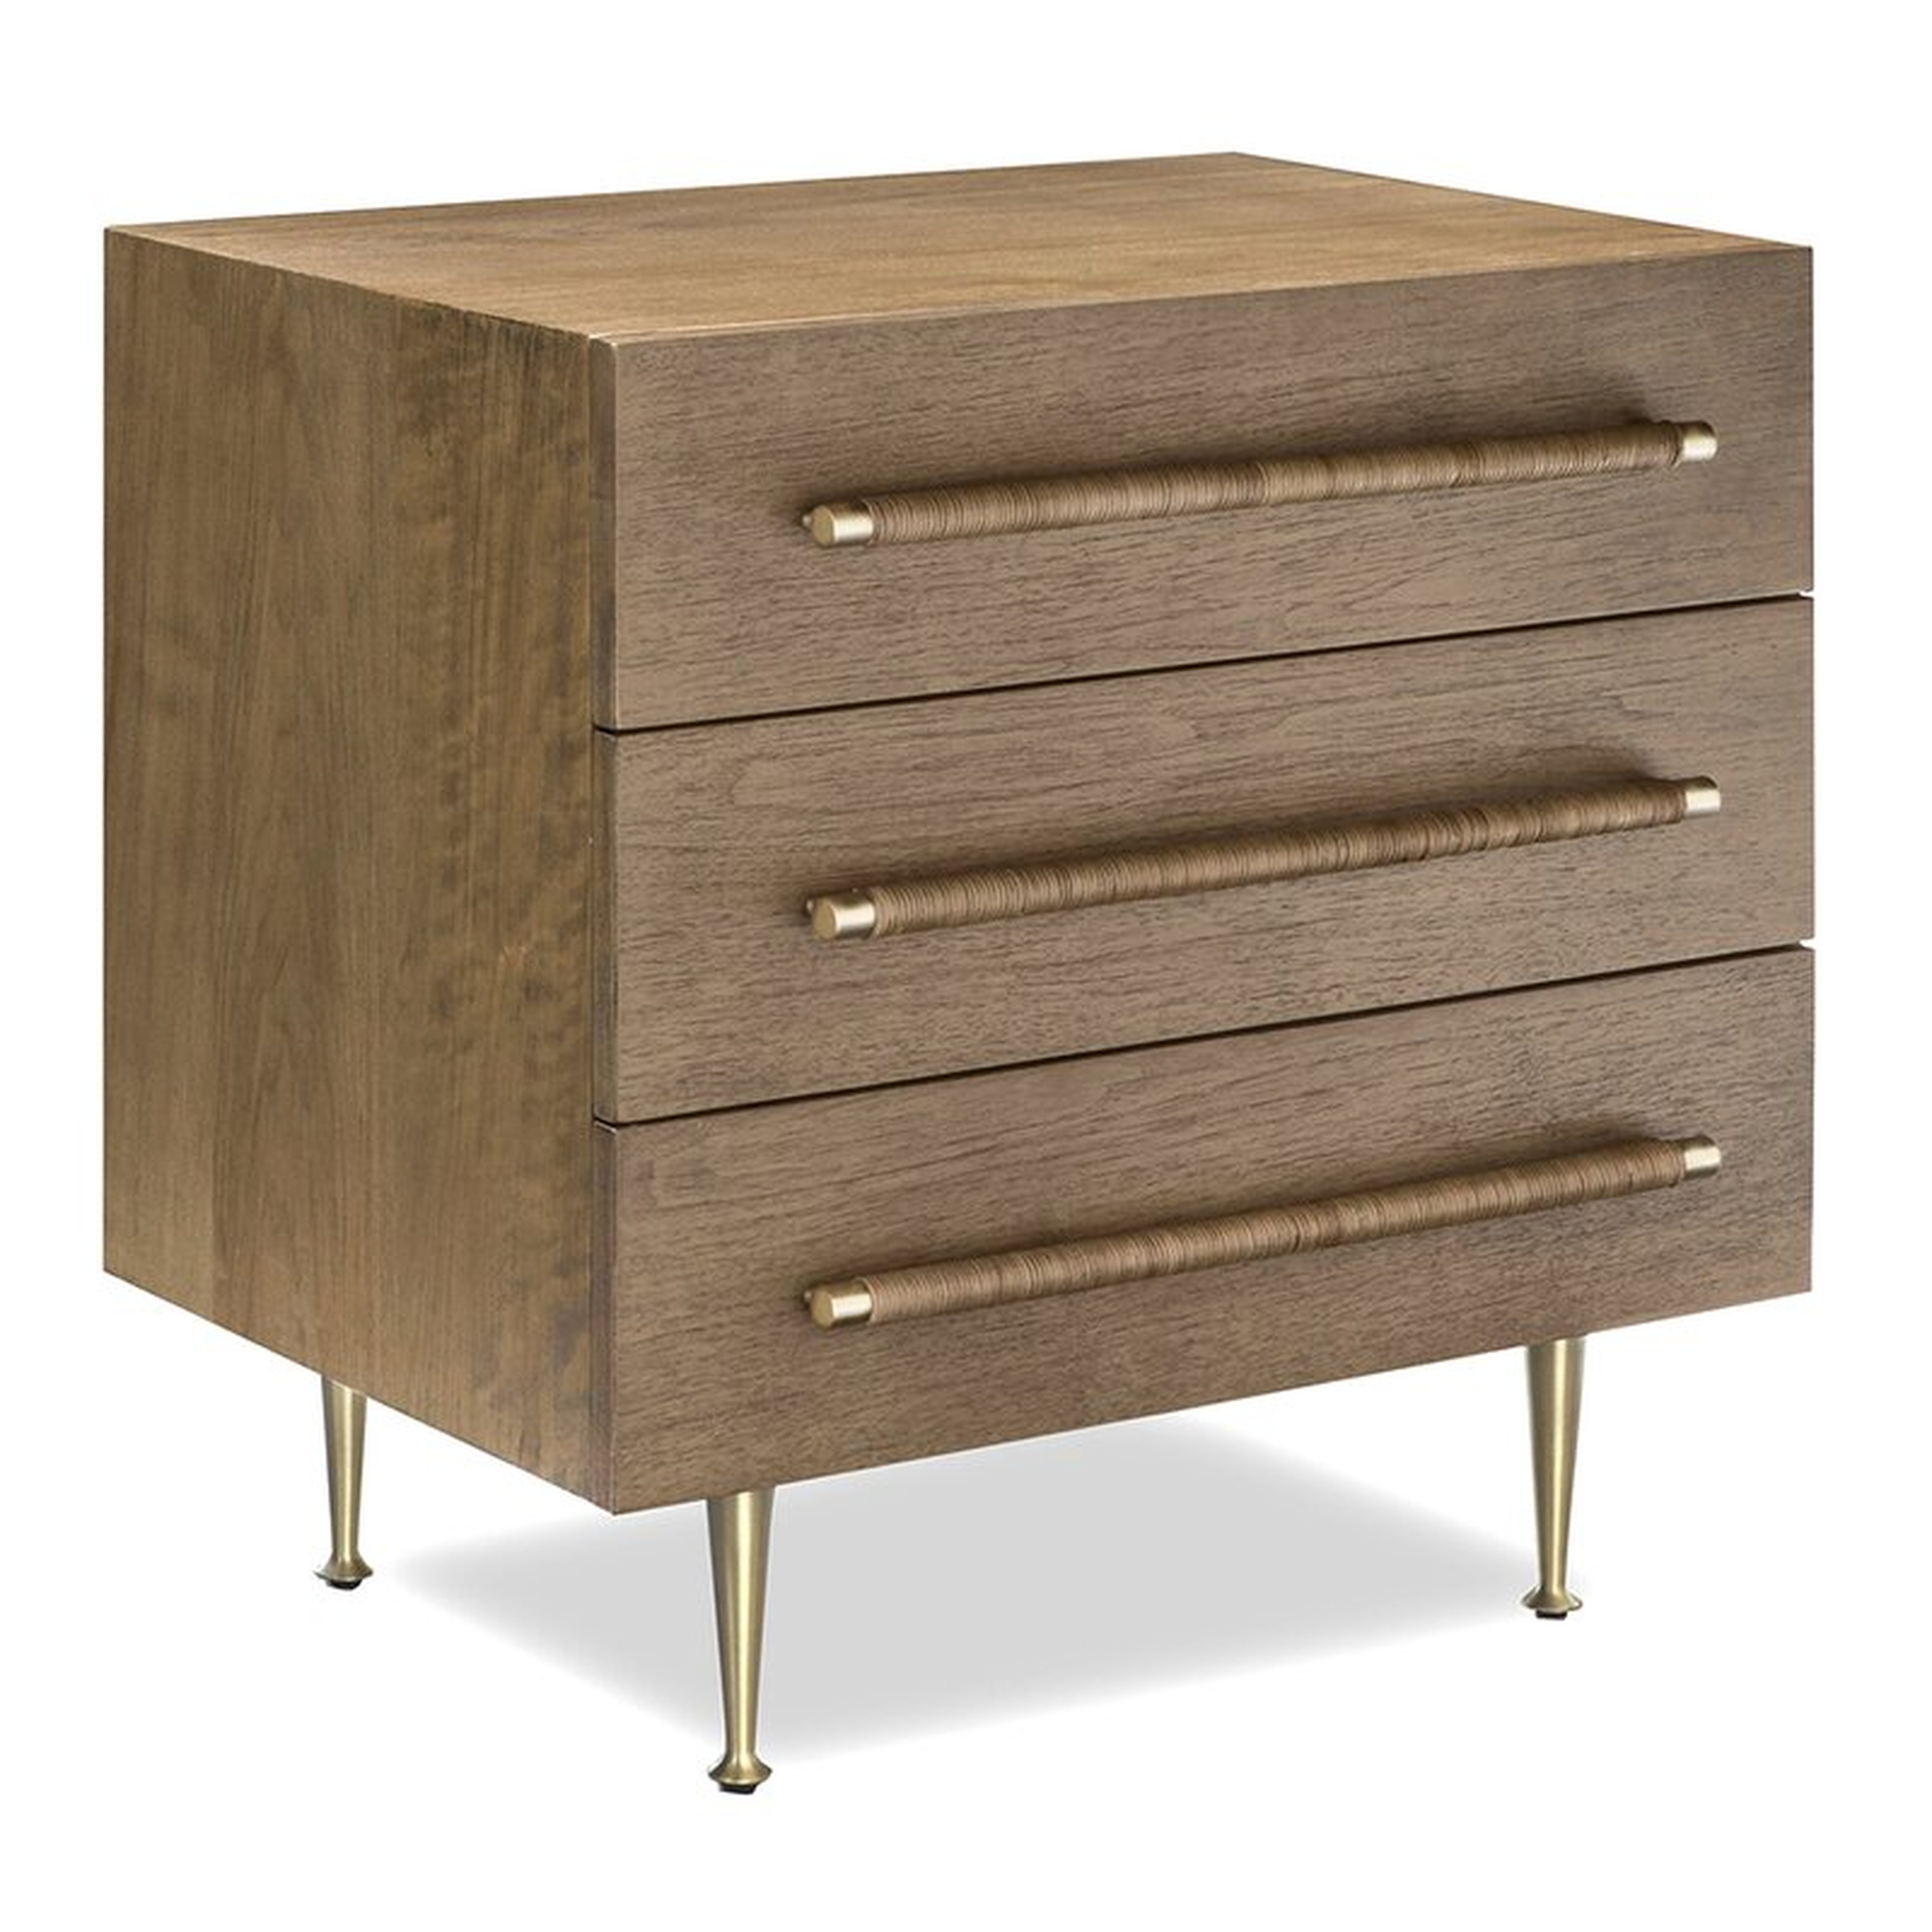 Brownstone Furniture Audrey Nightstand in Toffee - Perigold